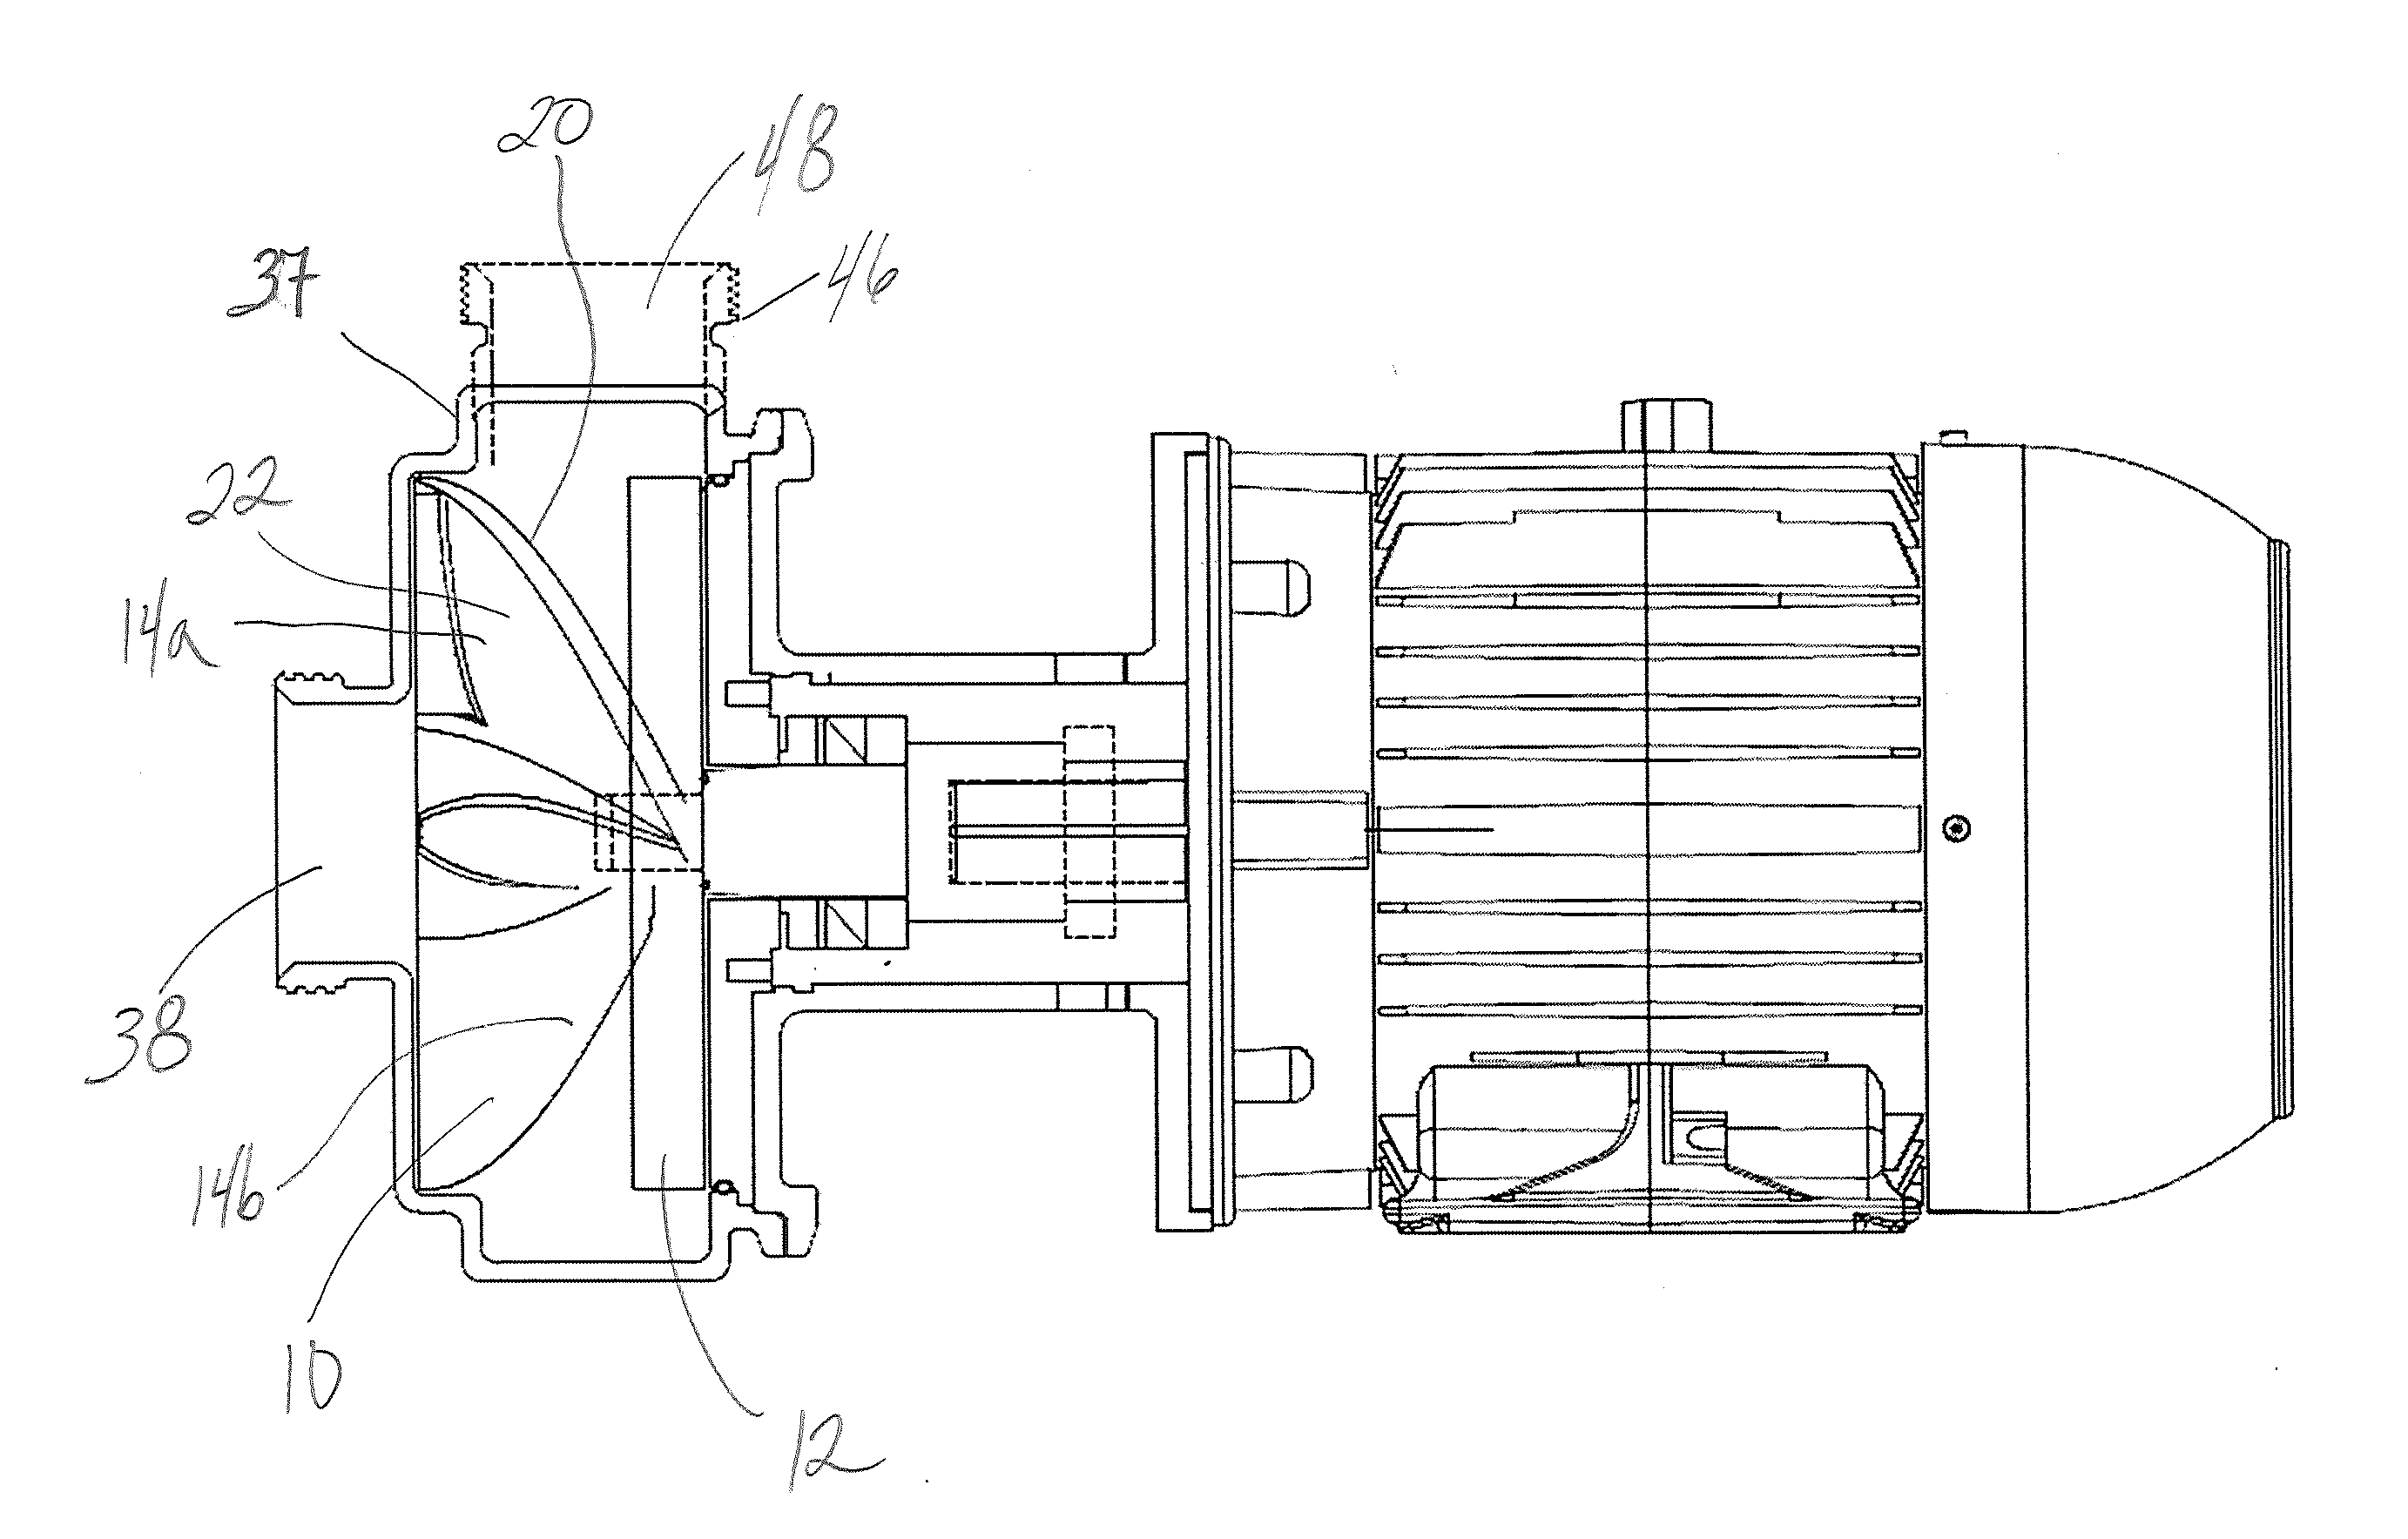 Radial impeller and casing for centrifugal pump